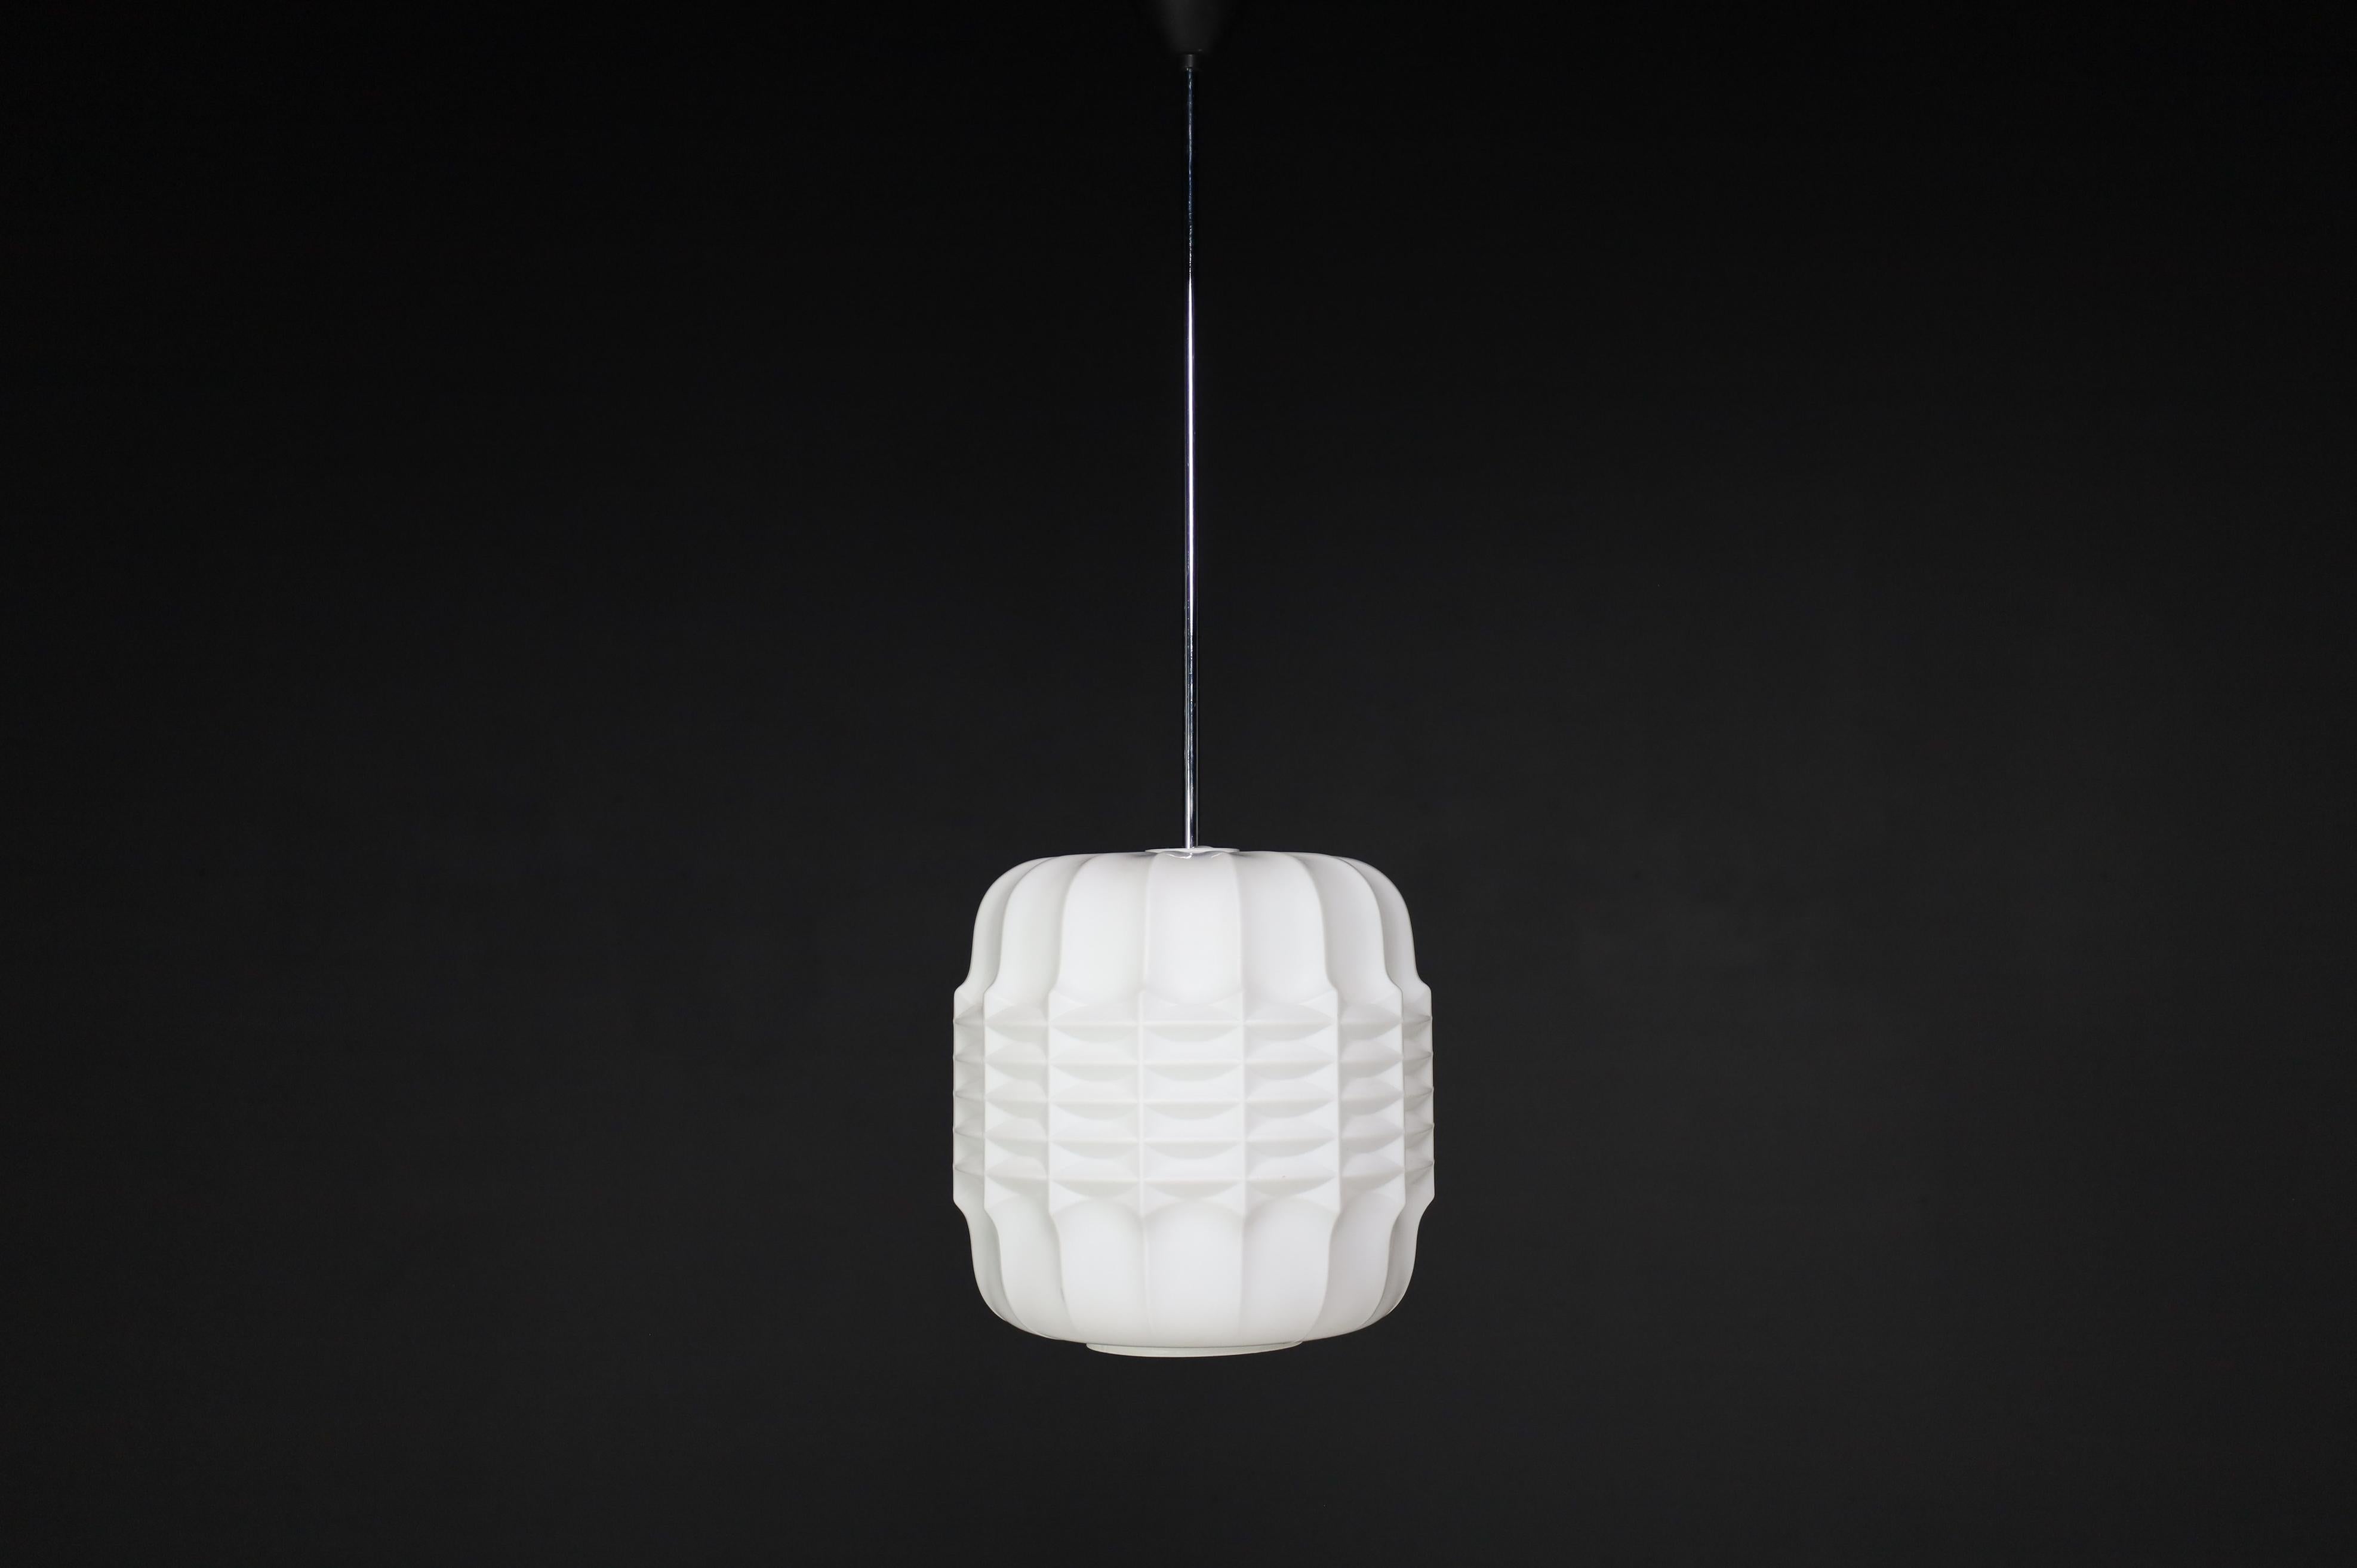 Brutalist Structured Opaline Glass Pendant, Europe 1960s

A large set of brutalist pendants, opaline glass, Europe, the 1960s. The diffuse light it spreads is very atmospheric. Completed with opaline glass and metal frame details, these pendants